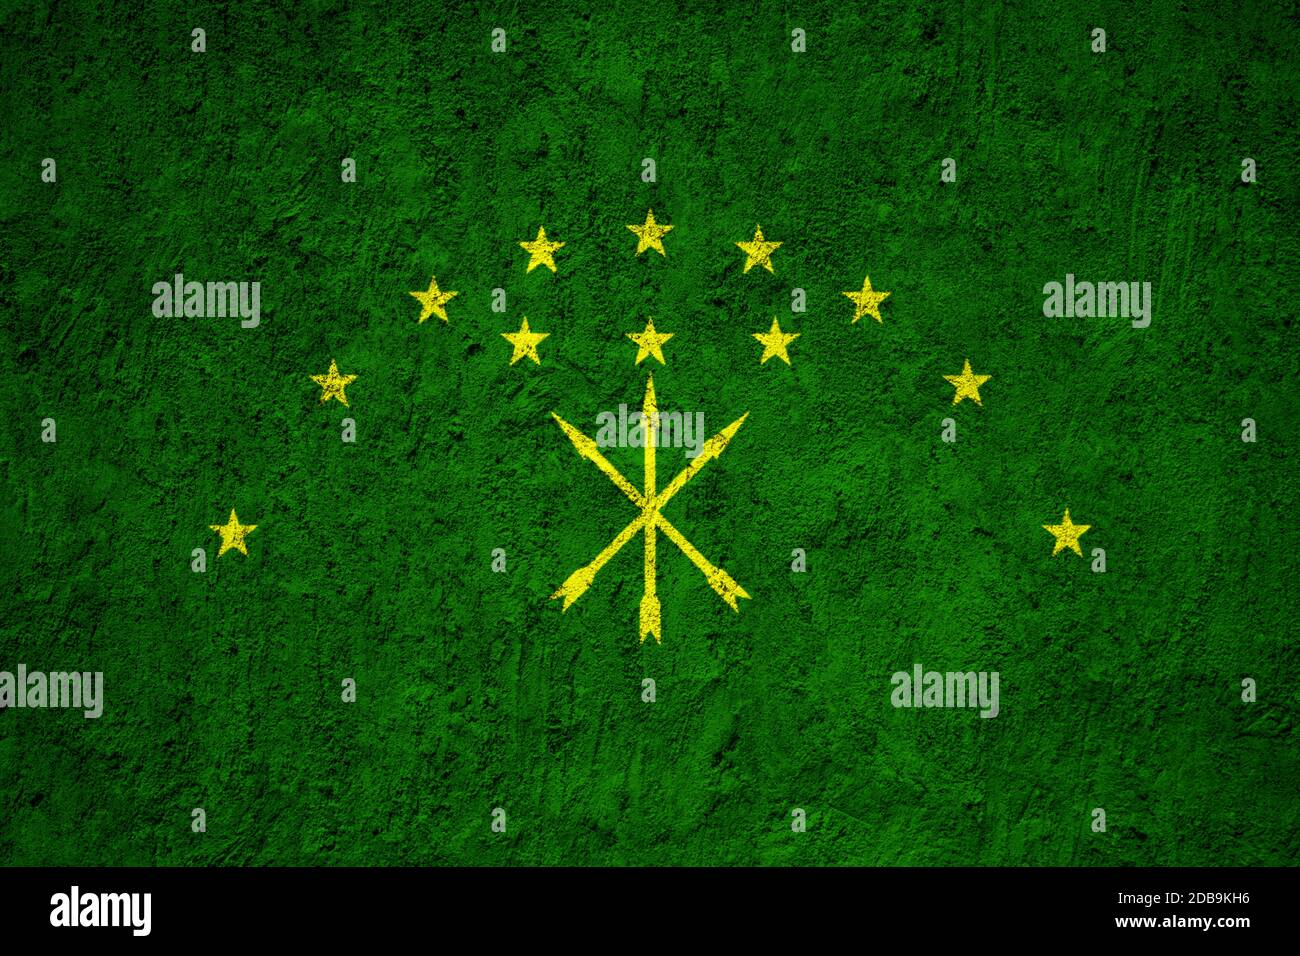 Adygea flag painted on the cracked grunge concrete wall Stock Photo